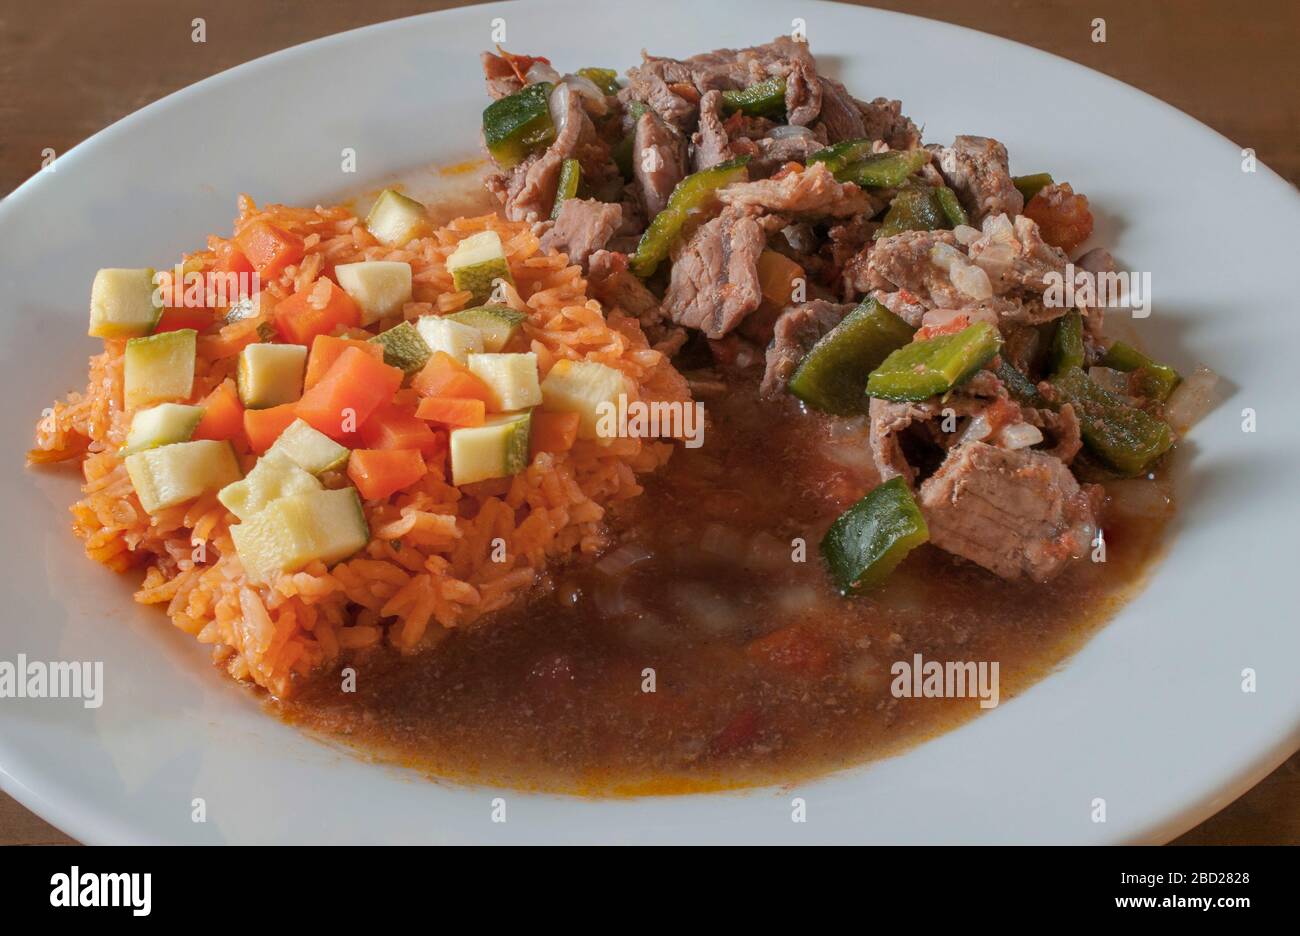 Mexican food ranchero beef steak with chile and Mexican rice on the side with vegetables on top of the rice spicy dish ranch beef steak Stock Photo